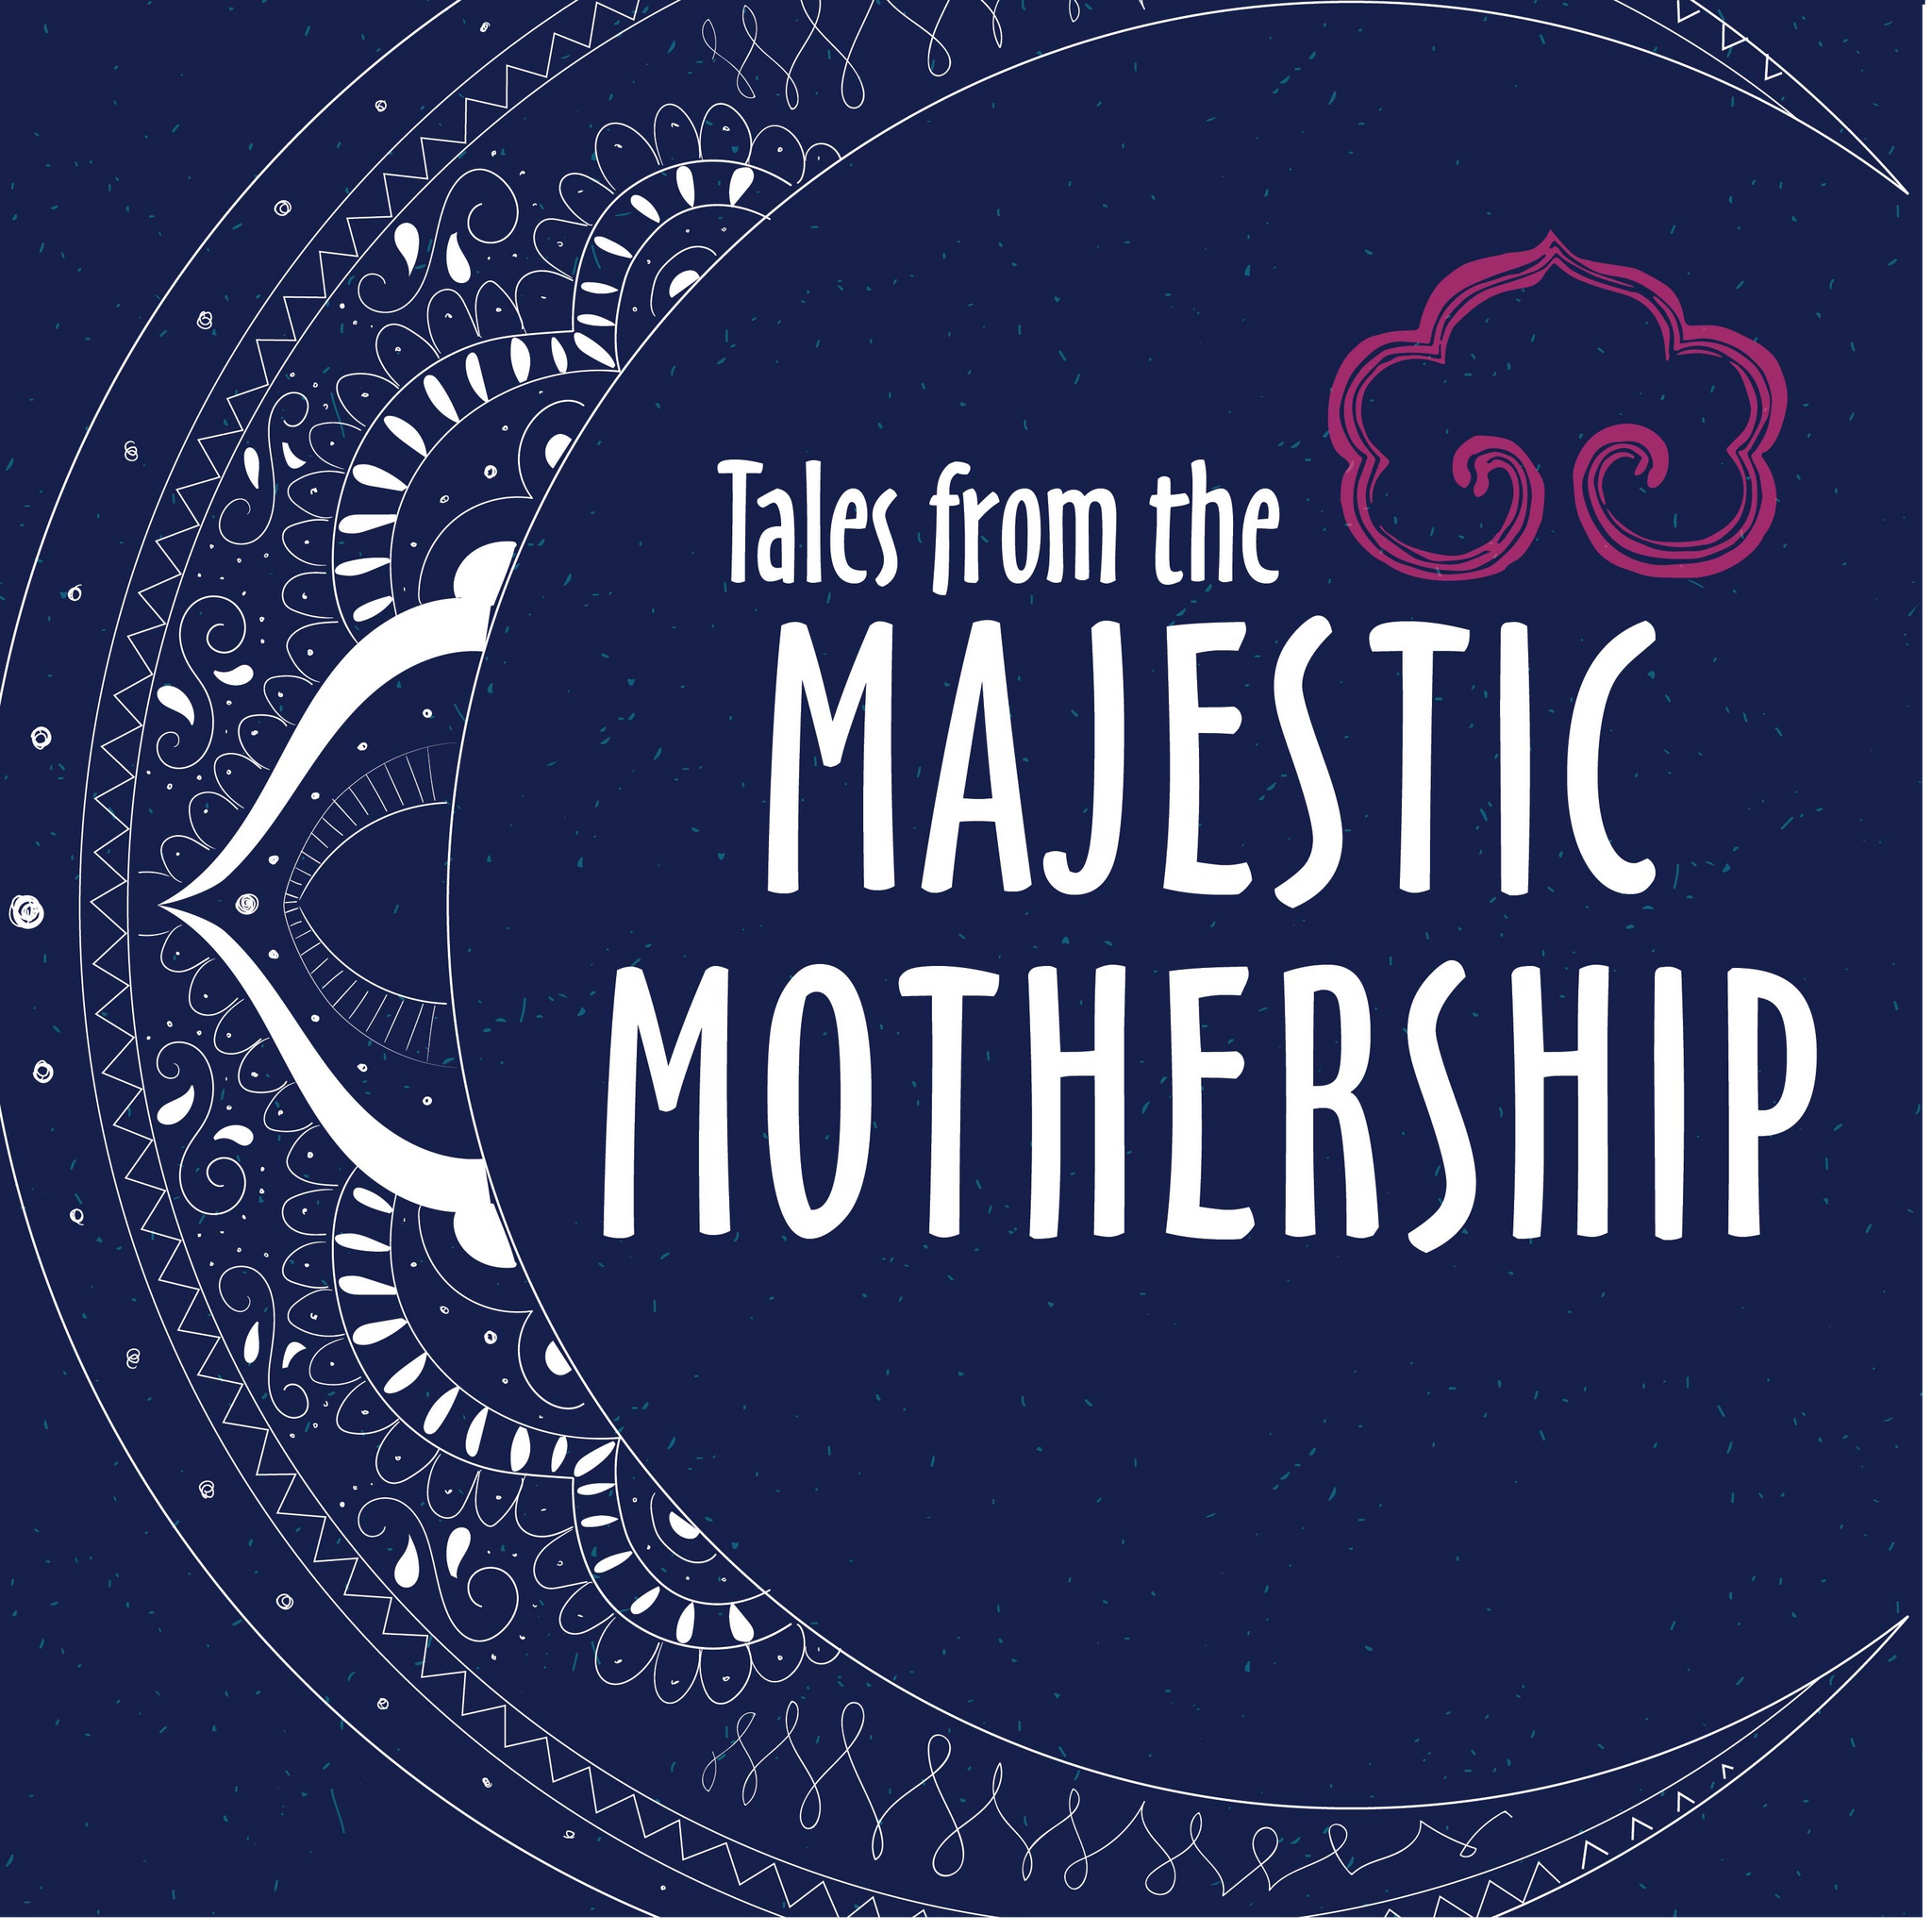 Tales from the Majestic Mothership: The New Podcast!!!